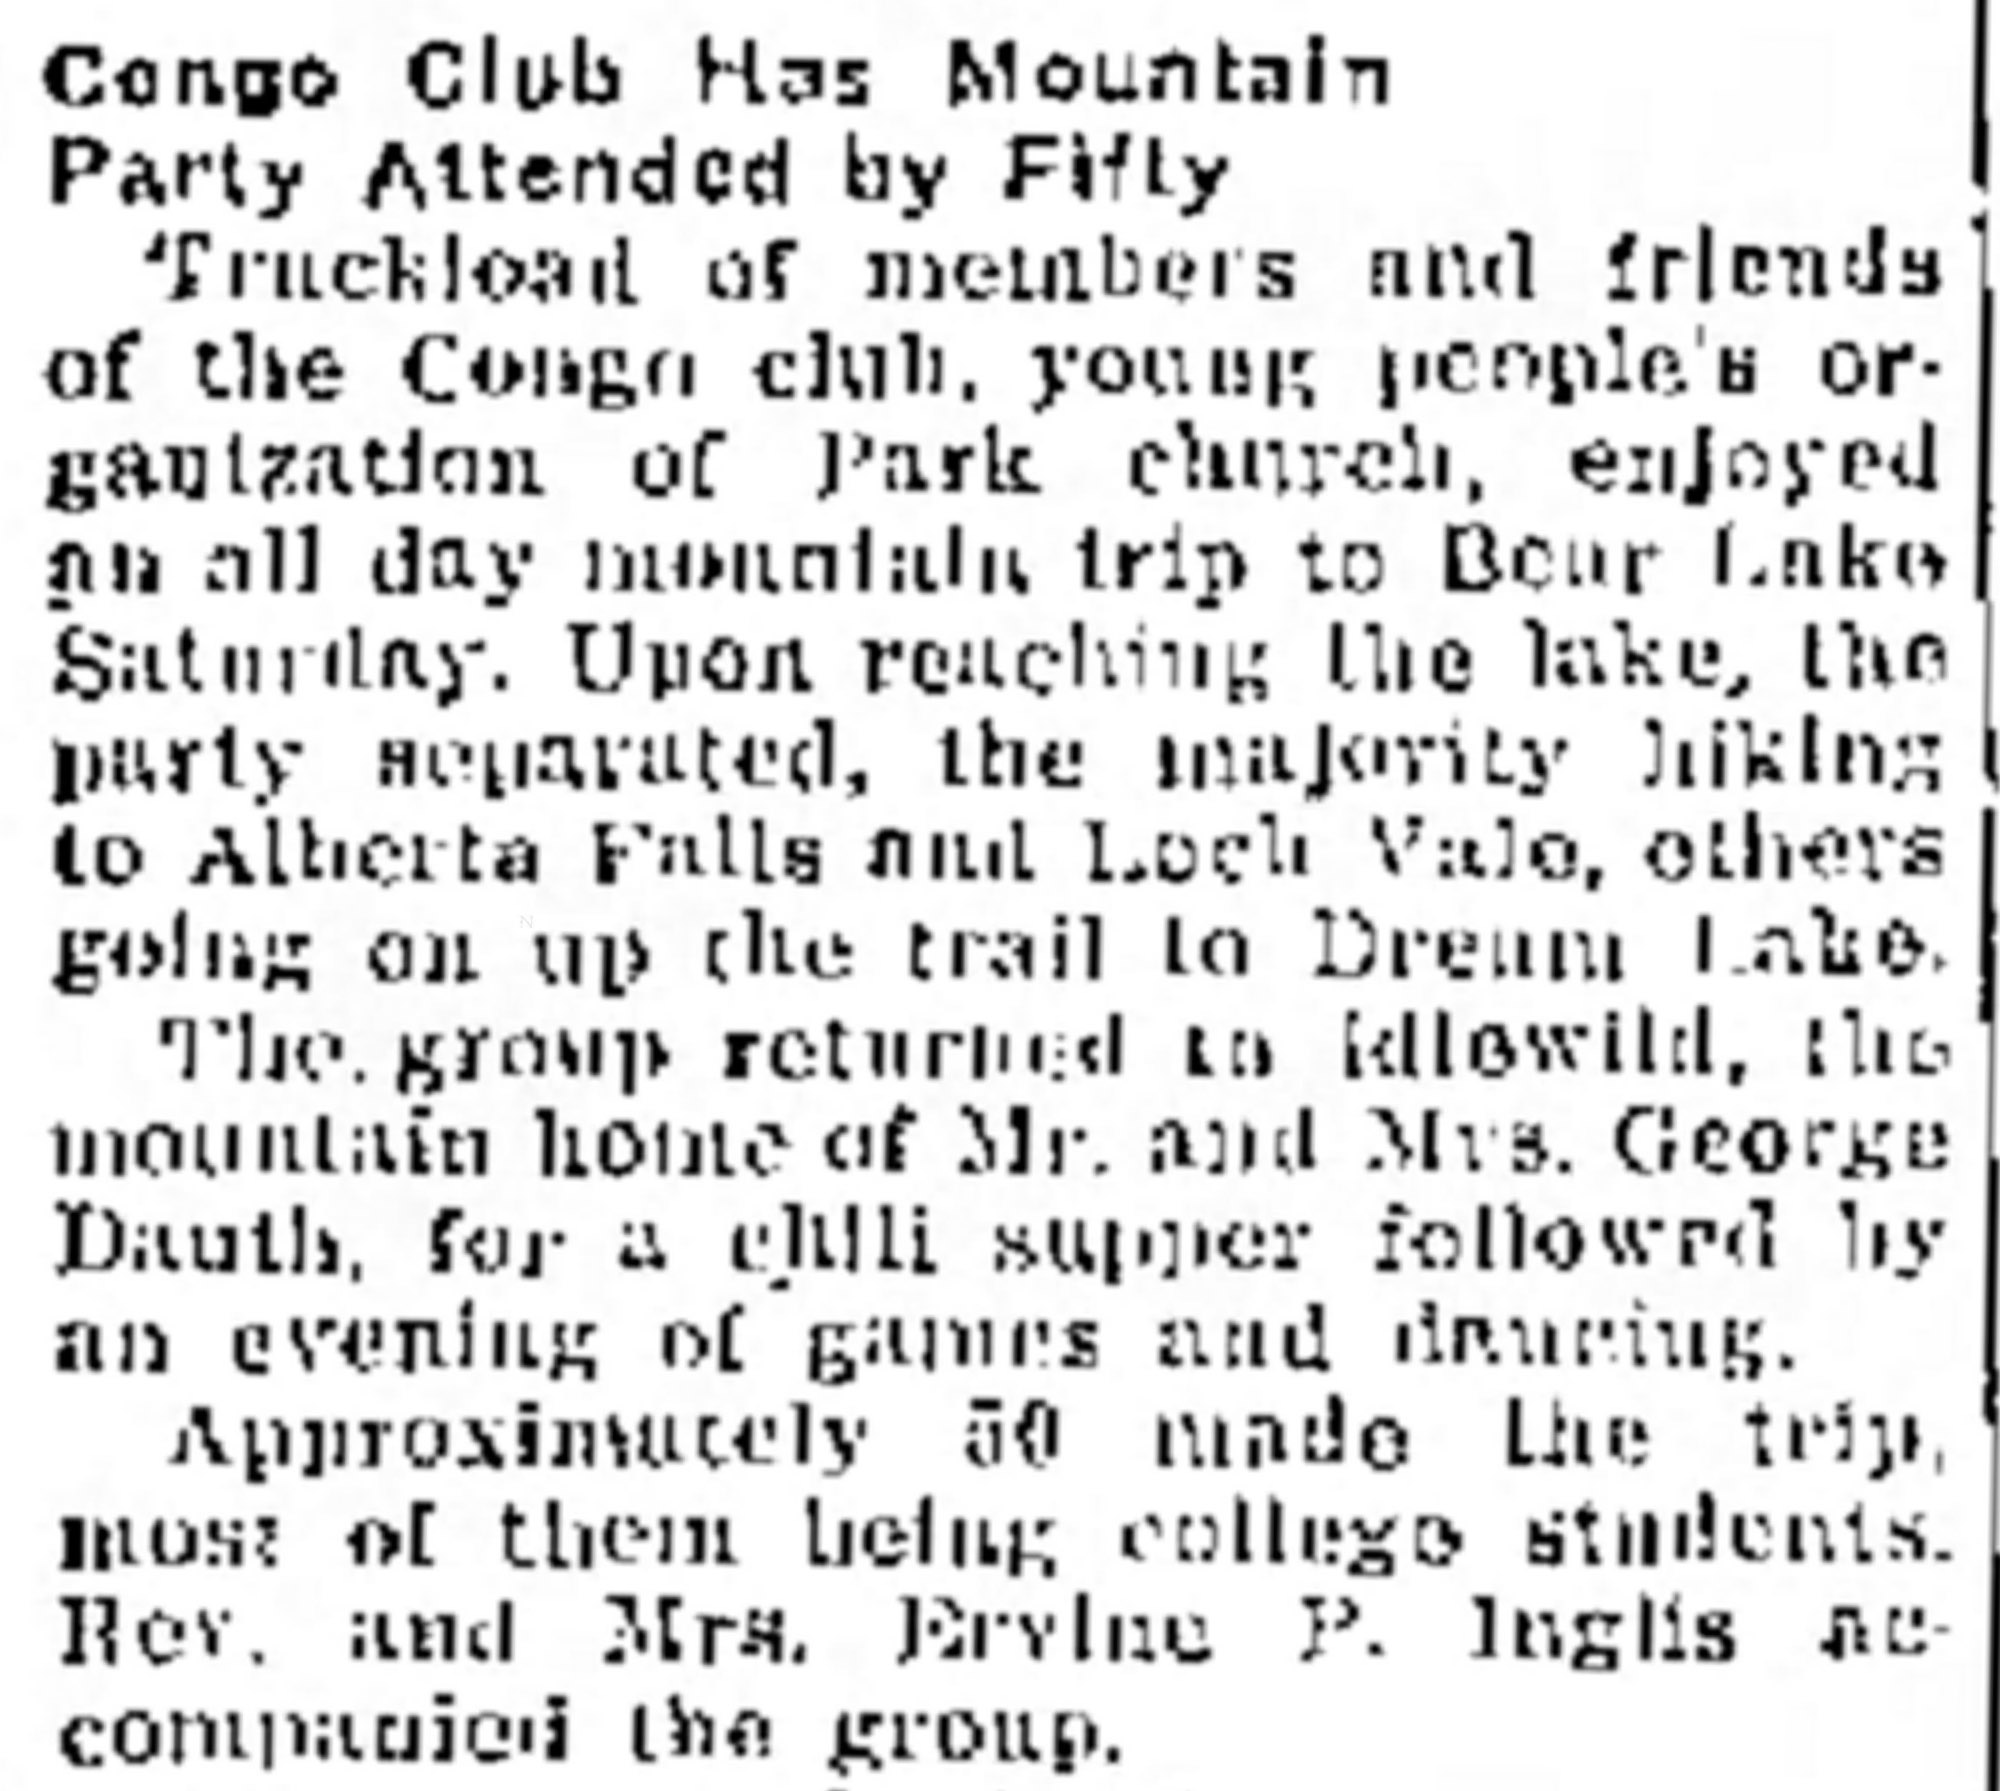 Dauth Family Archive - 1934-10-16 - Greeley Daily Tribune - Congo Club at George Dauths Idlewild Lodge